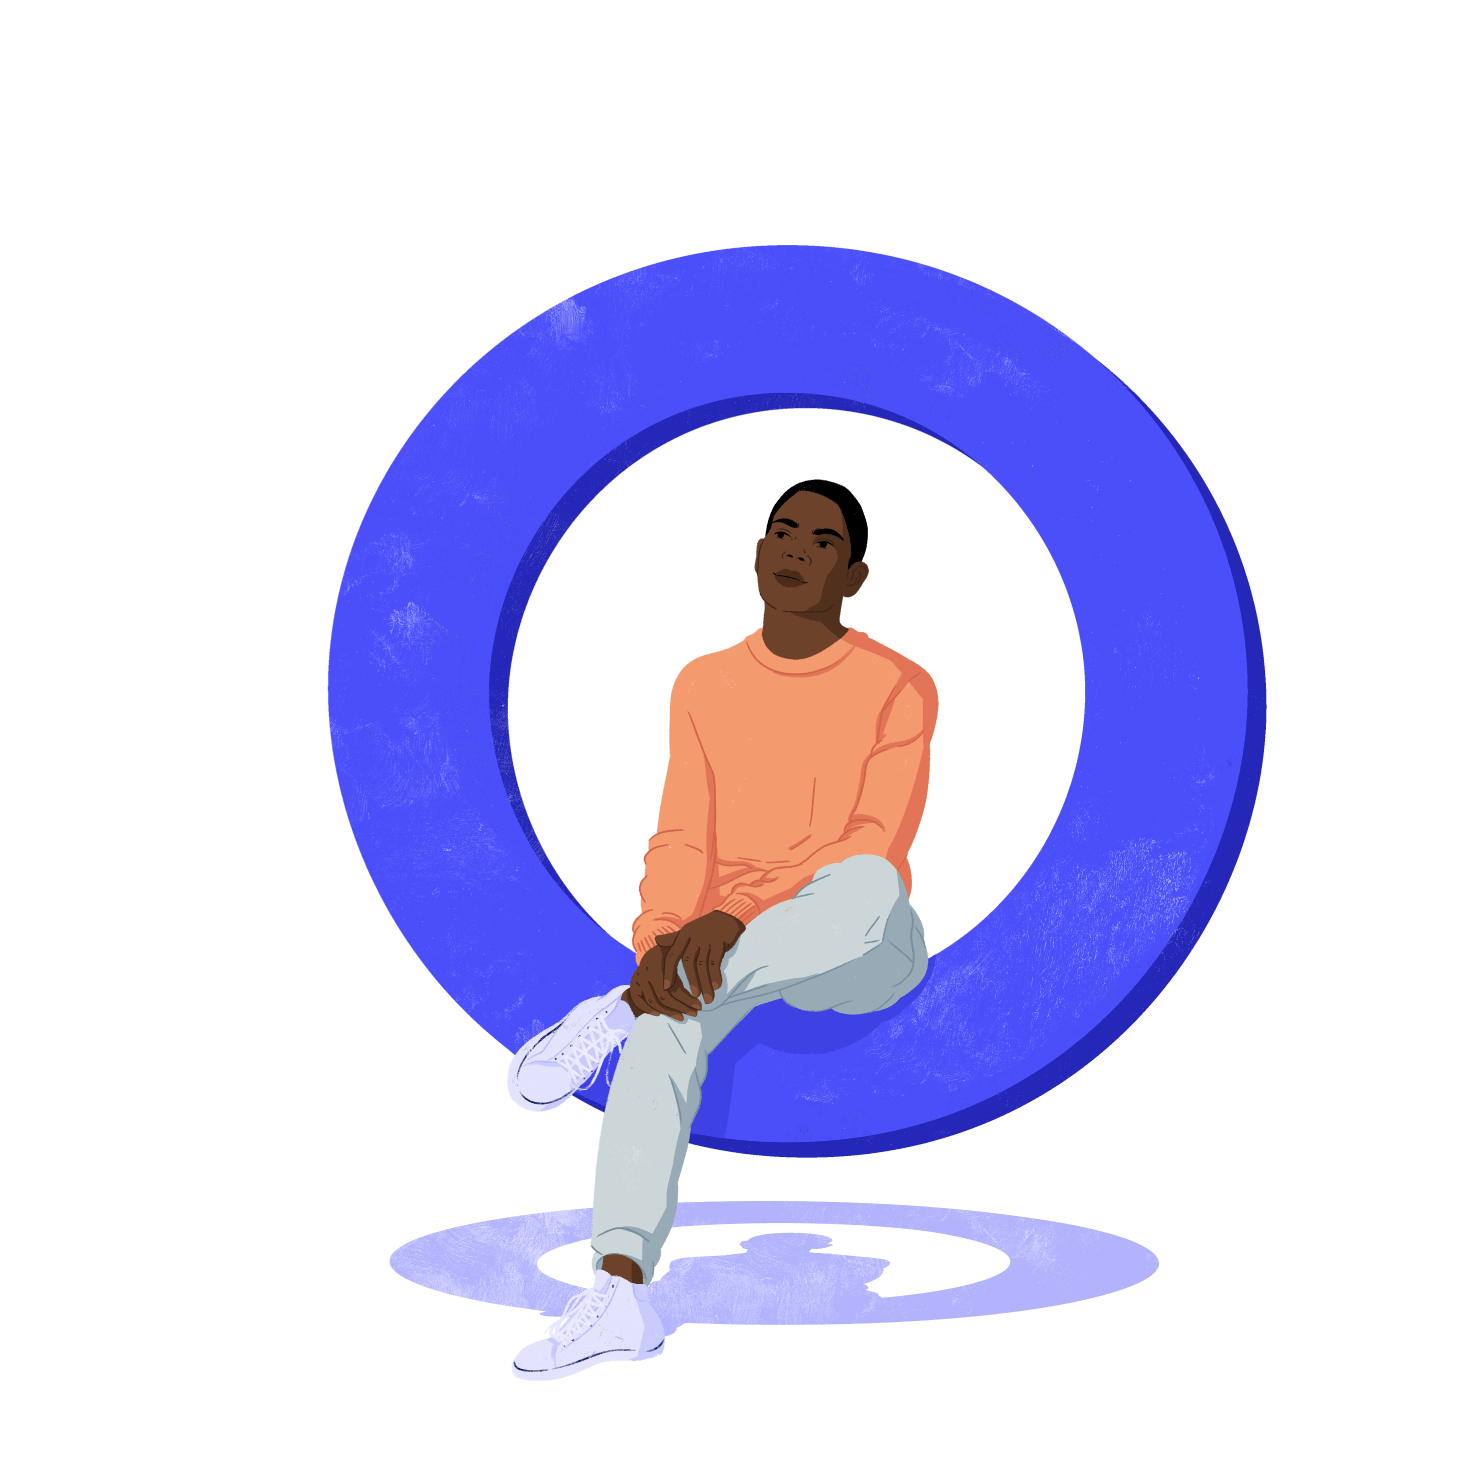 Illustration of a person sitting in the Oscar O logo